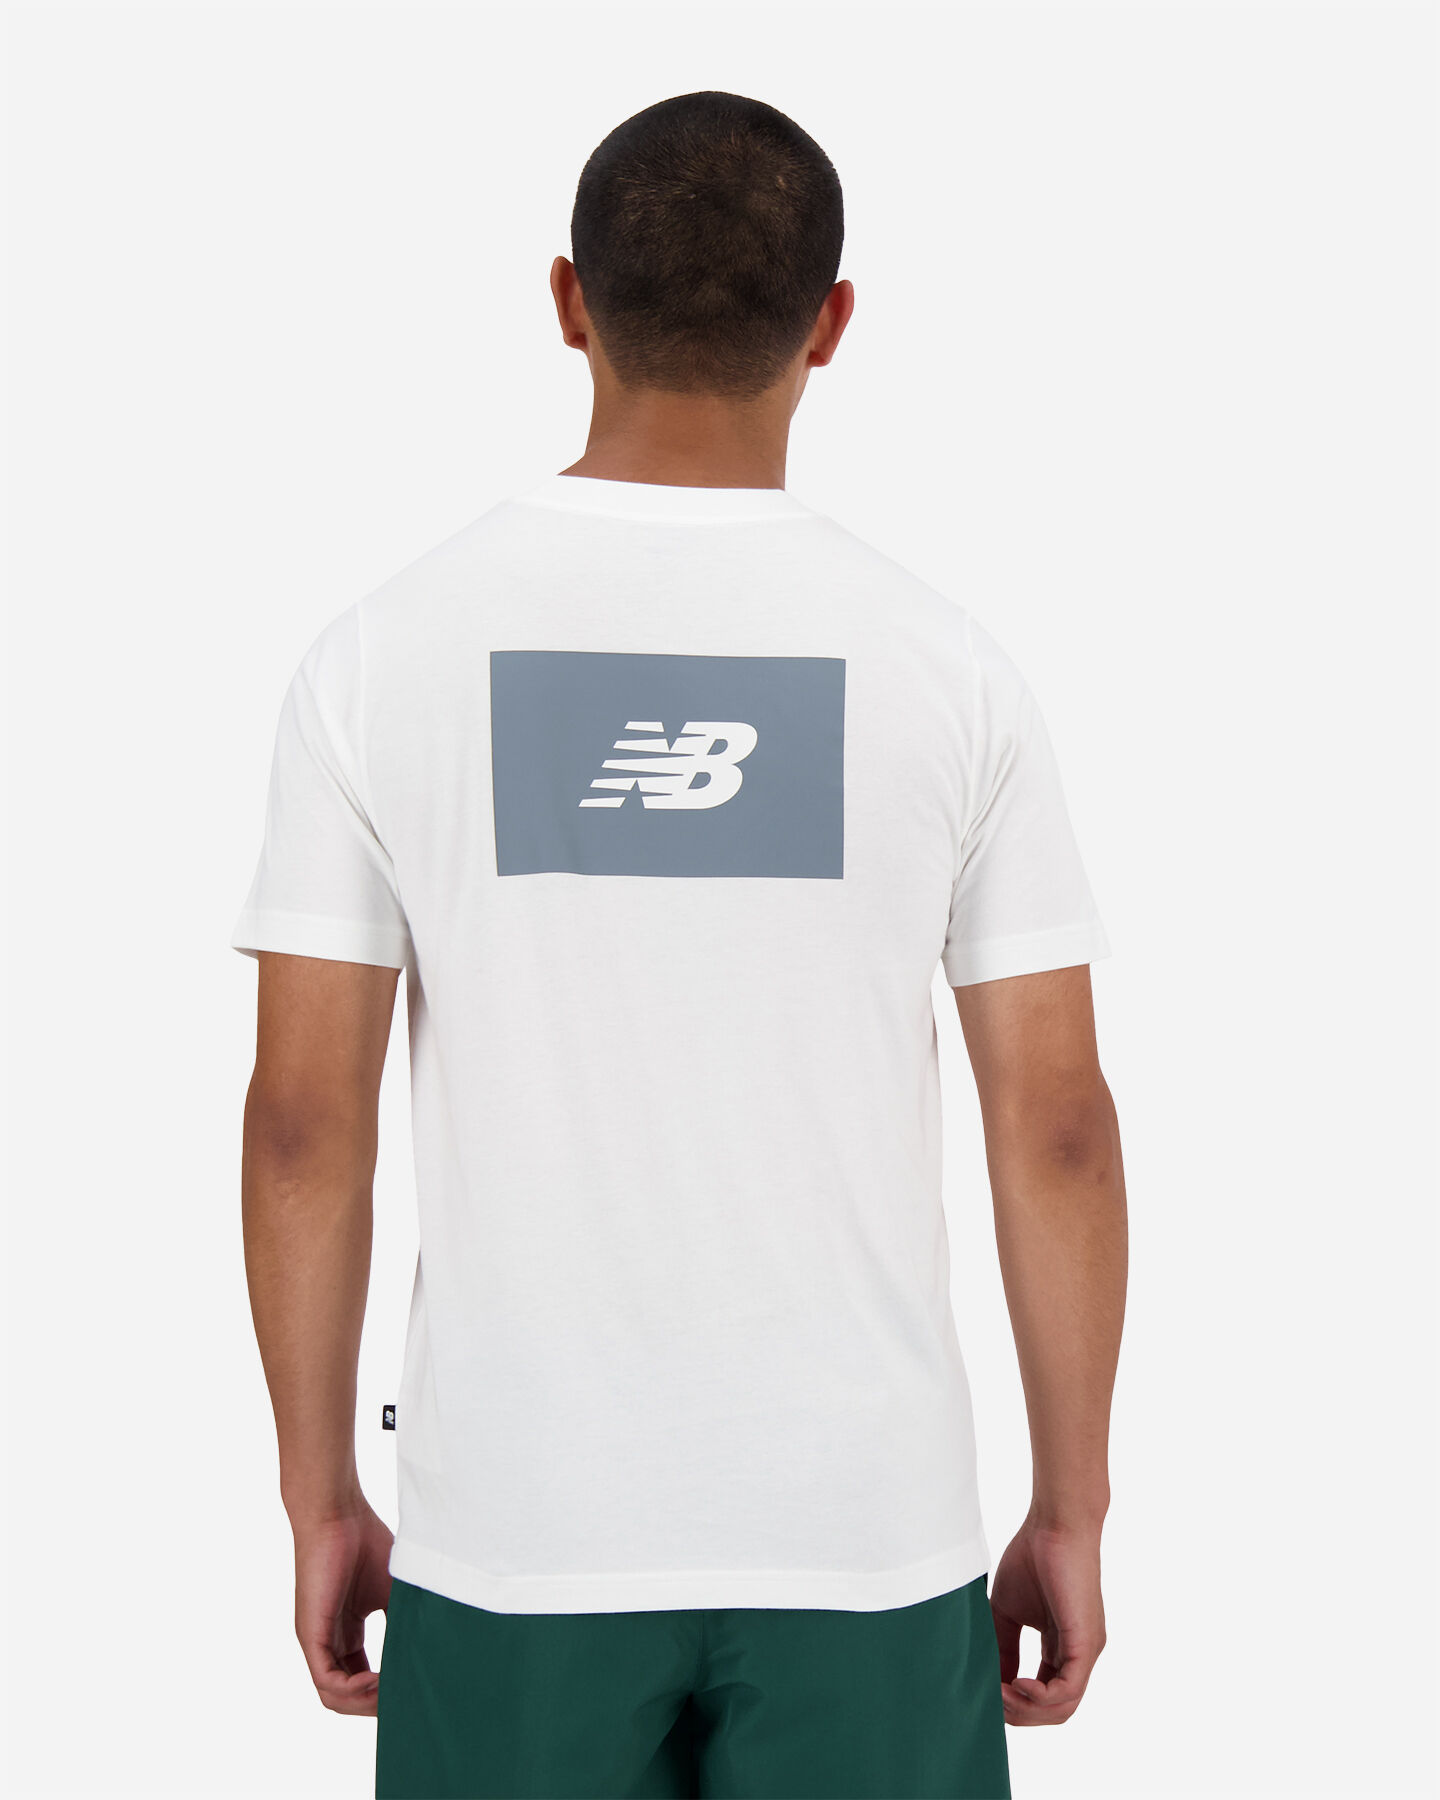  T-Shirt NEW BALANCE ATHLETICS NEVER AGE M S5652565|-|S* scatto 2